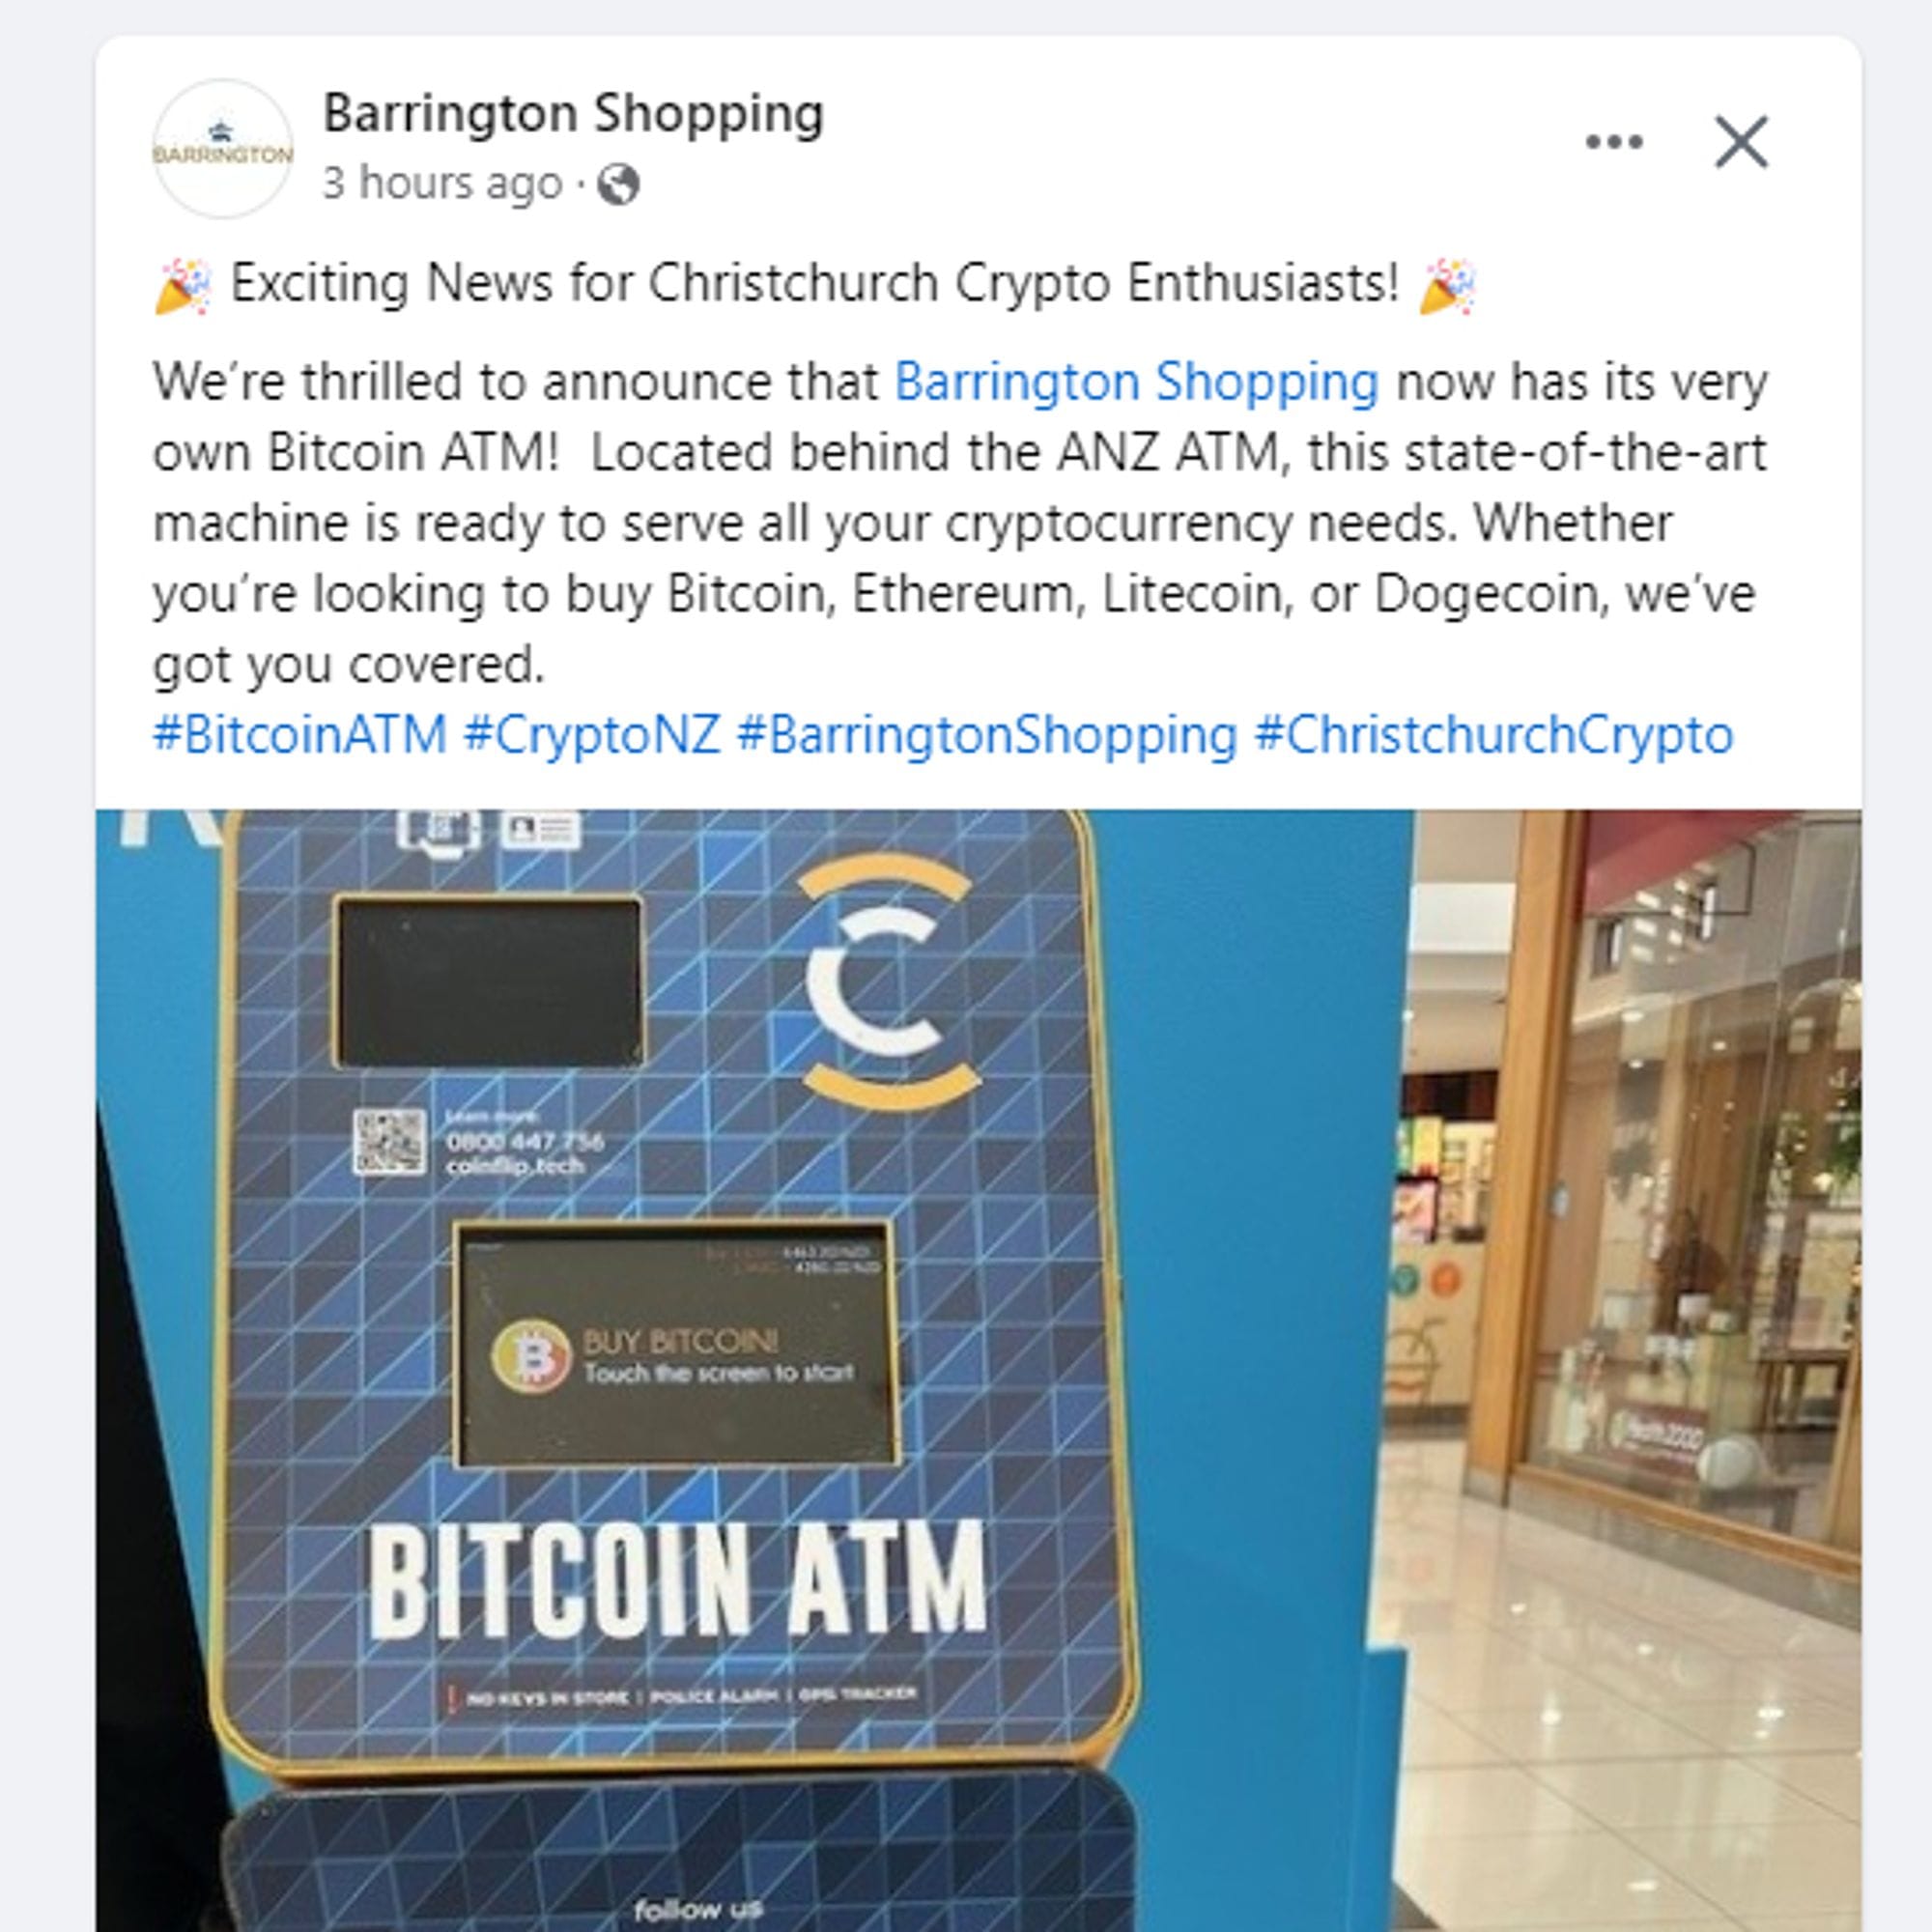 Screenshot of FB post by Barrington Shopping mall with text: 🎉 Exciting News for Christchurch Crypto Enthusiasts! 🎉 We’re thrilled to announce that Barrington Shopping now has its very own Bitcoin ATM!  Located behind the ANZ ATM, this state-of-the-art machine is ready to serve all your cryptocurrency needs. Whether you’re looking to buy Bitcoin, Ethereum, Litecoin, or Dogecoin, we’ve got you covered.